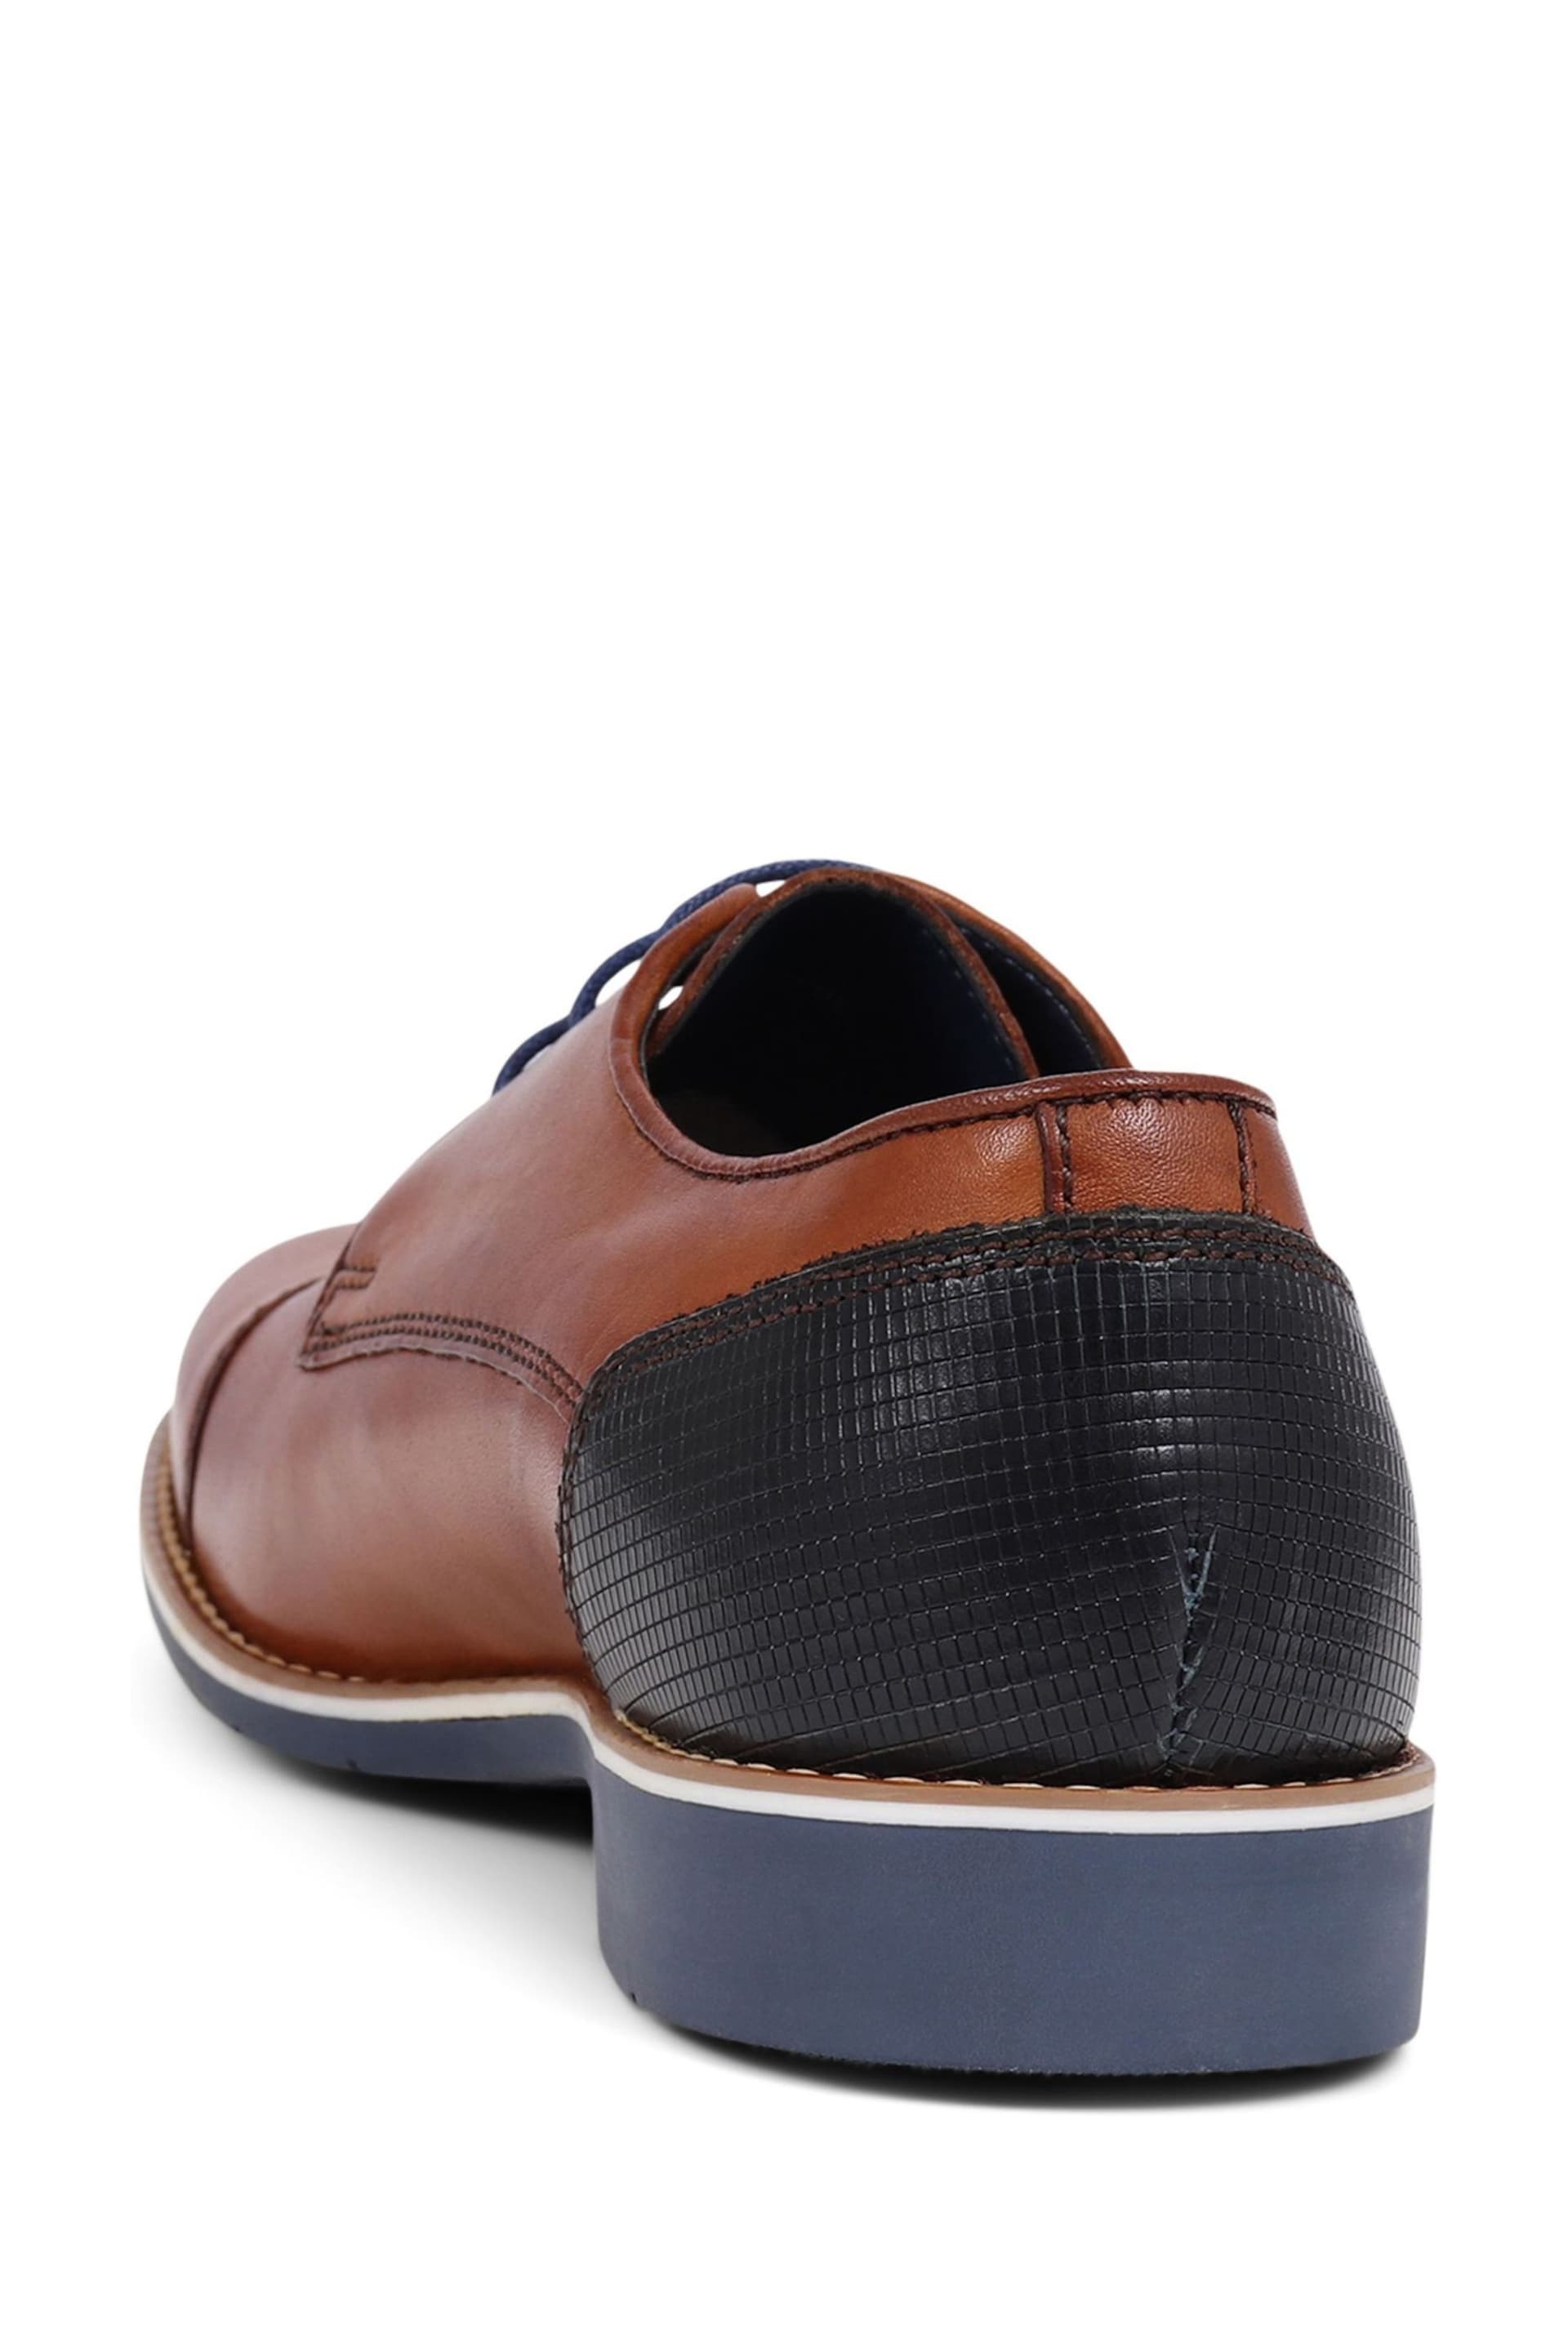 Pavers Smart Leather Brown Shoes - Image 3 of 5